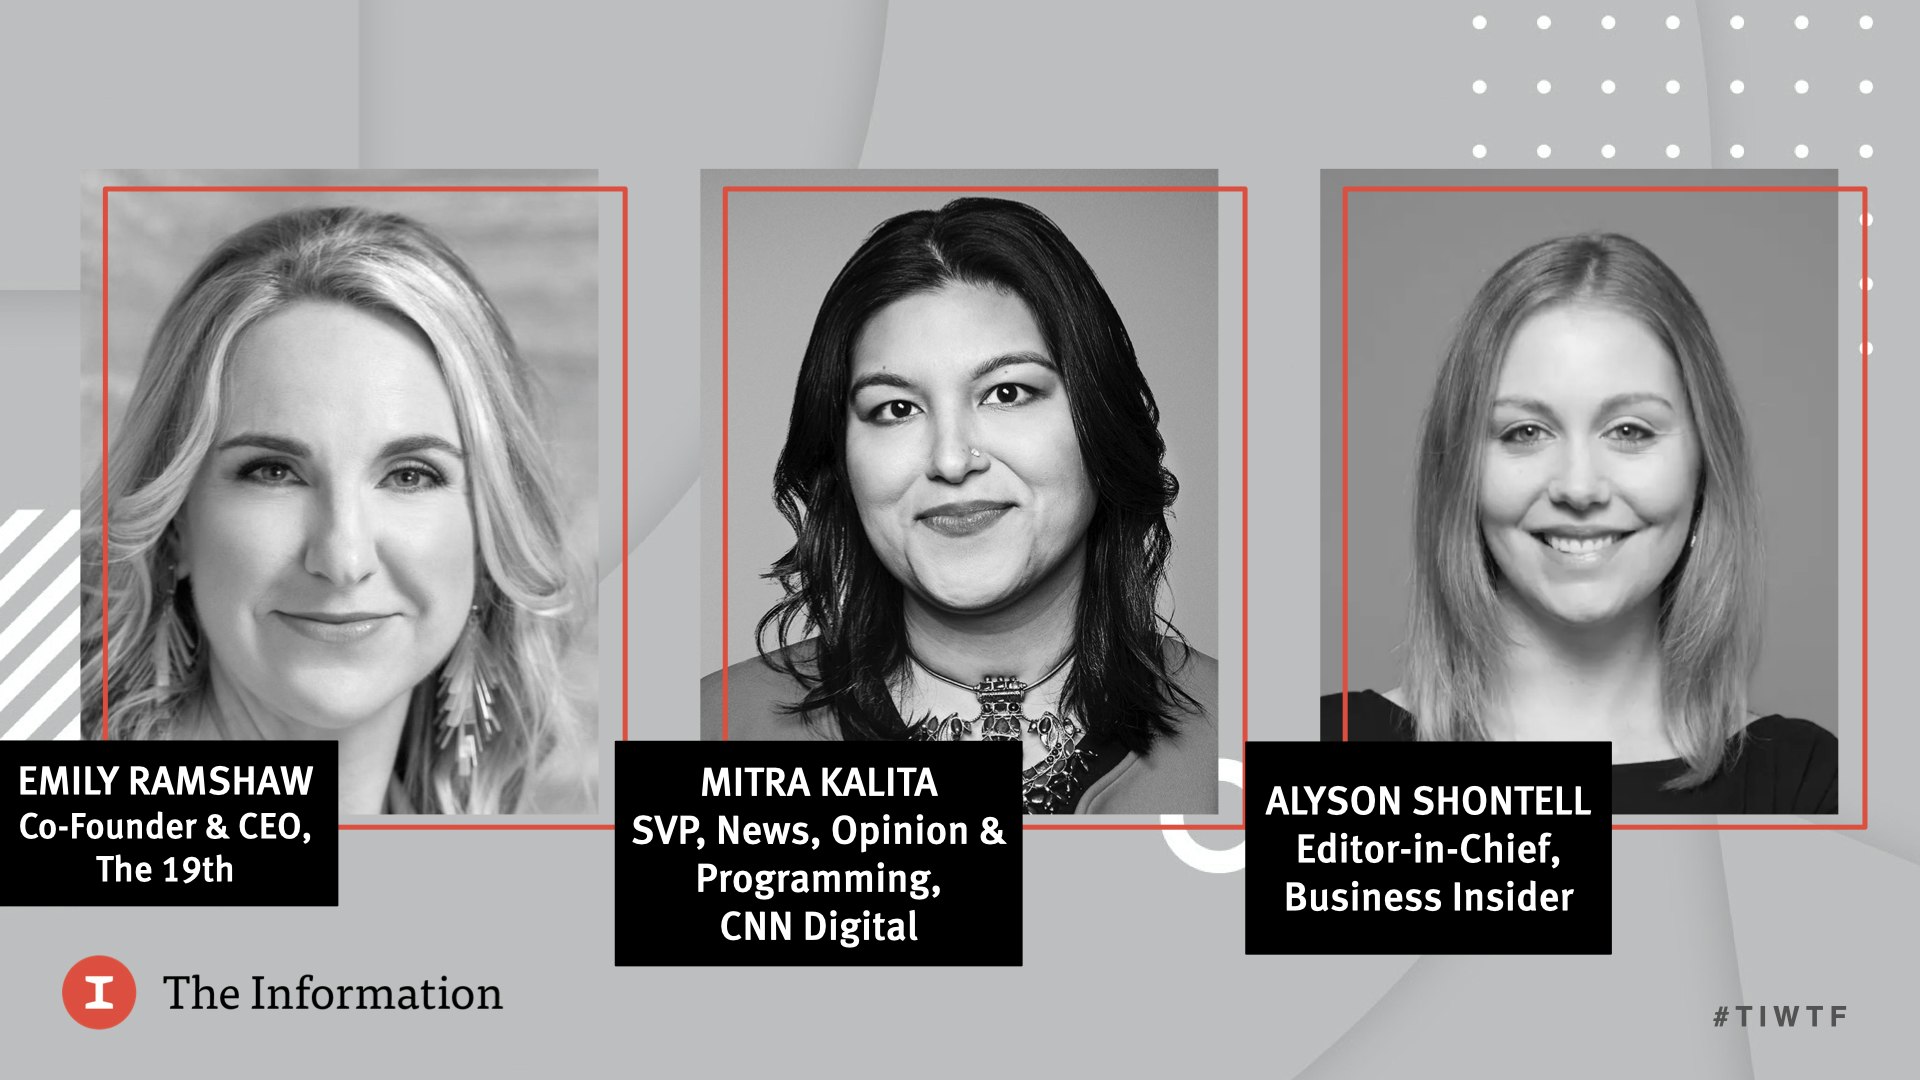  WTF 2020 - Media Panel with Business Insider's Editor-in-Chief Alyson Shontell, The 19th's Co-Founder & CEO Emily Ramshaw, and CNN's Digital SVP for News, Opinion & Programming Mitra Kalita, moderated by Jessica Toonkel, reporter at The Information